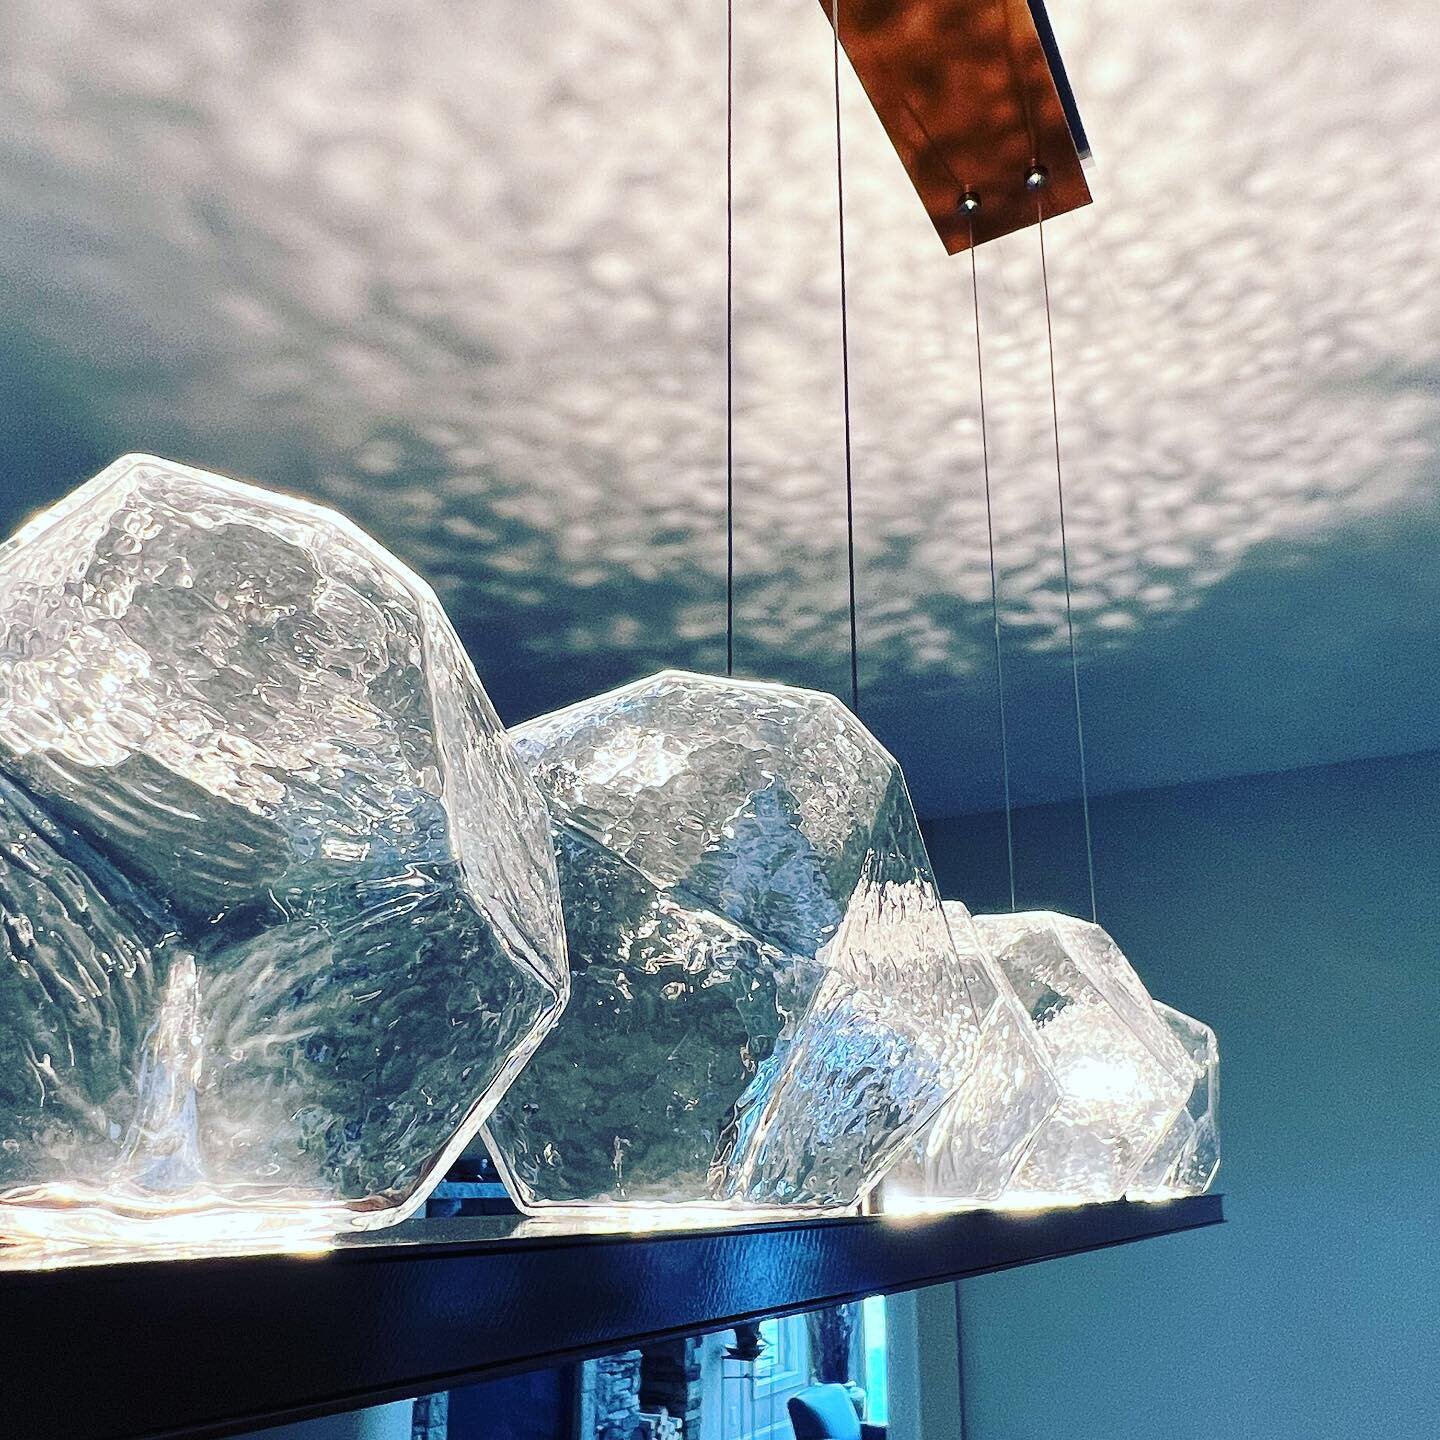 Warm days call for cool lighting 🧊!!! We are loving the Gem 💎 collection from @hammertonlighting illuminates this dining room and makes the ceiling another layer of the overall design! #hammertongem #interiordesign #nhinteriordesigner #lakehouse